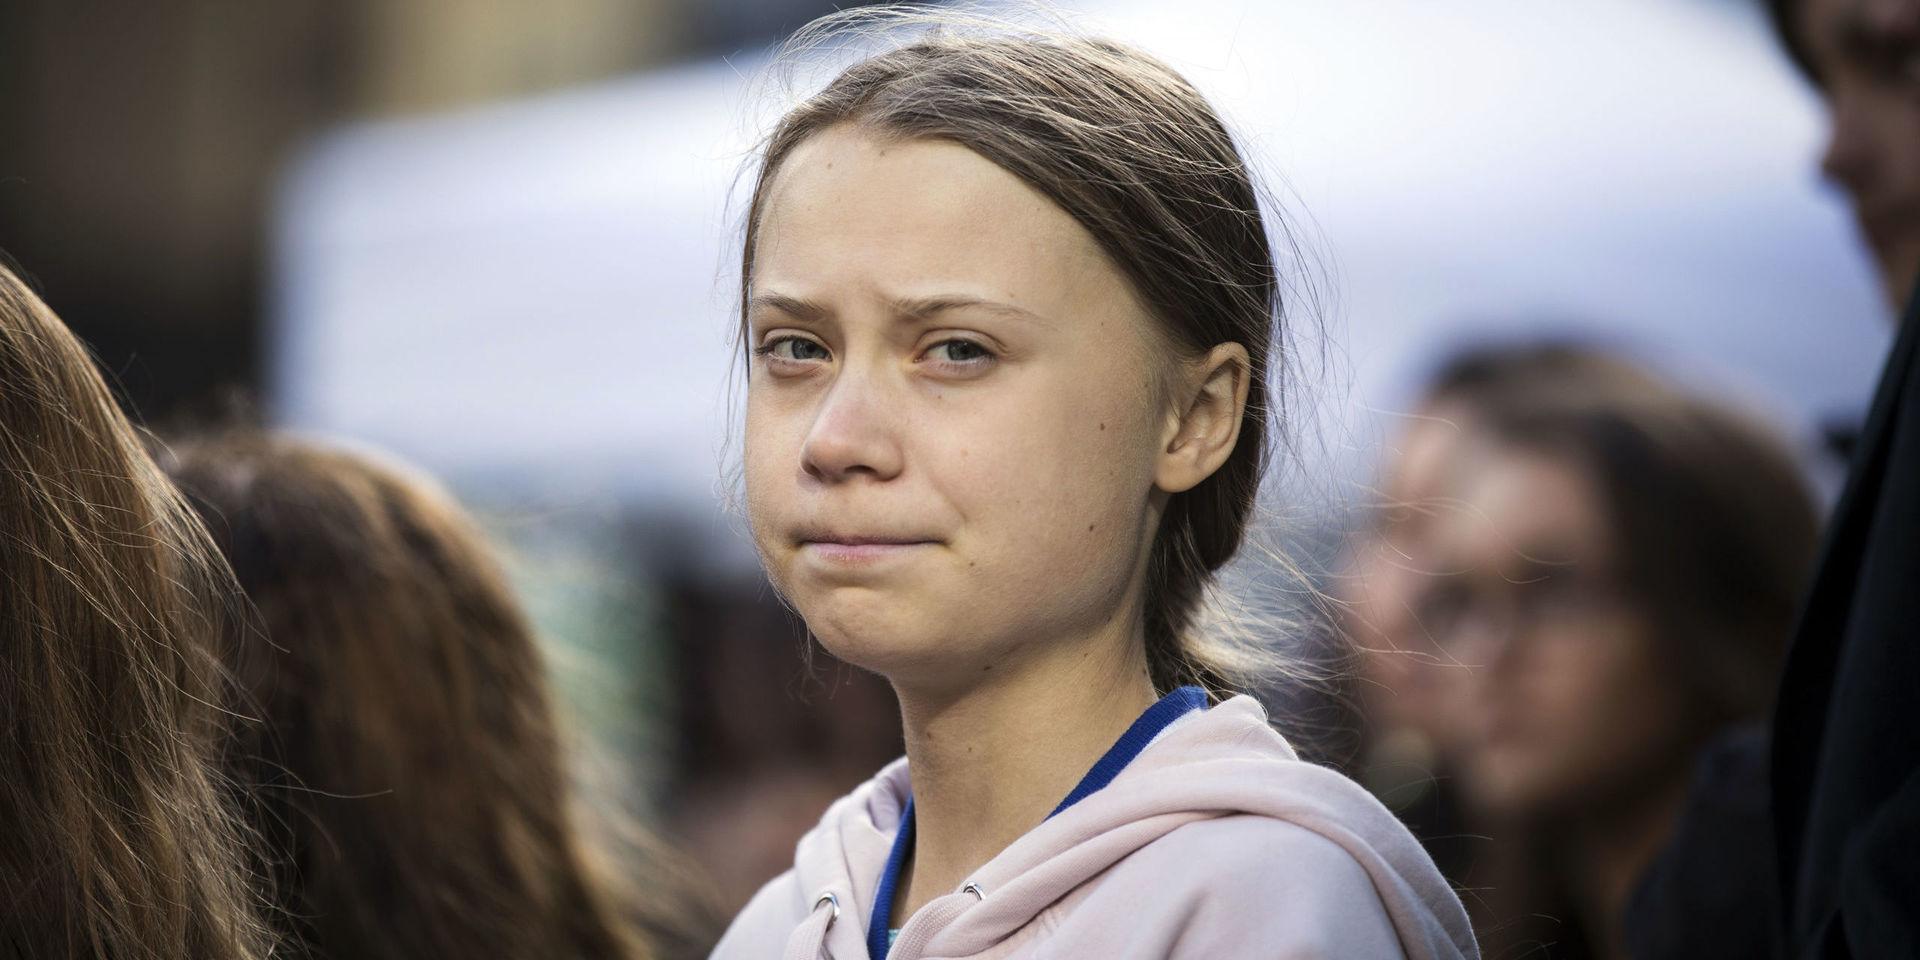 Swedish climate activist, Greta Thunberg, attends a climate rally, in Vancouver, British Columbia, on Friday, Oct. 25, 2019. (Melissa Renwick/The Canadian Press via AP)  MMR219